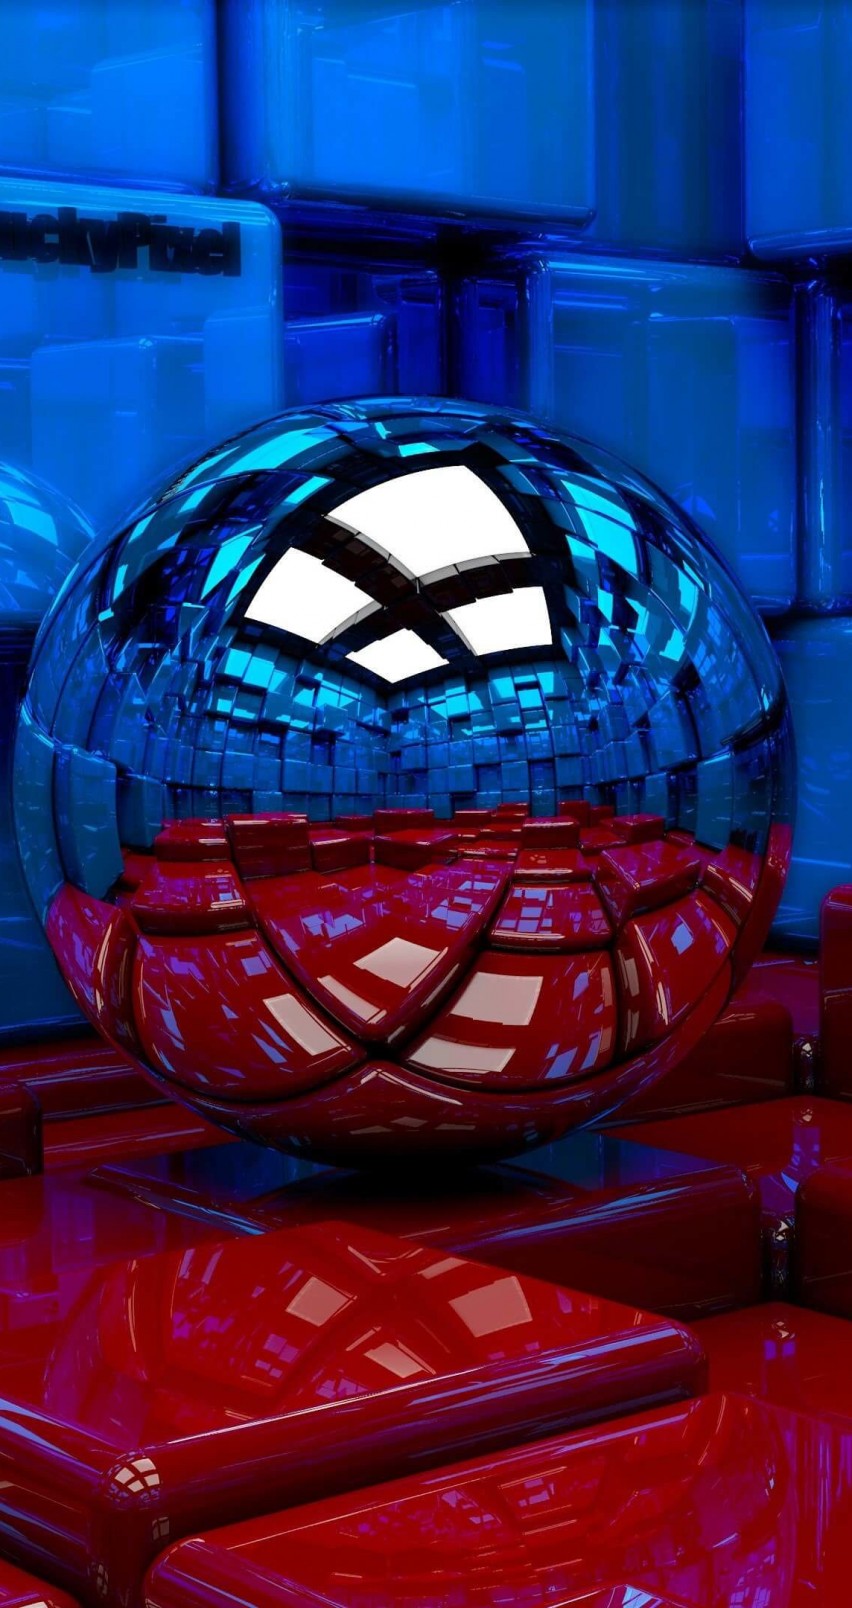 Metallic Sphere Reflecting The Cube Room Wallpaper for Apple iPhone 6 / 6s